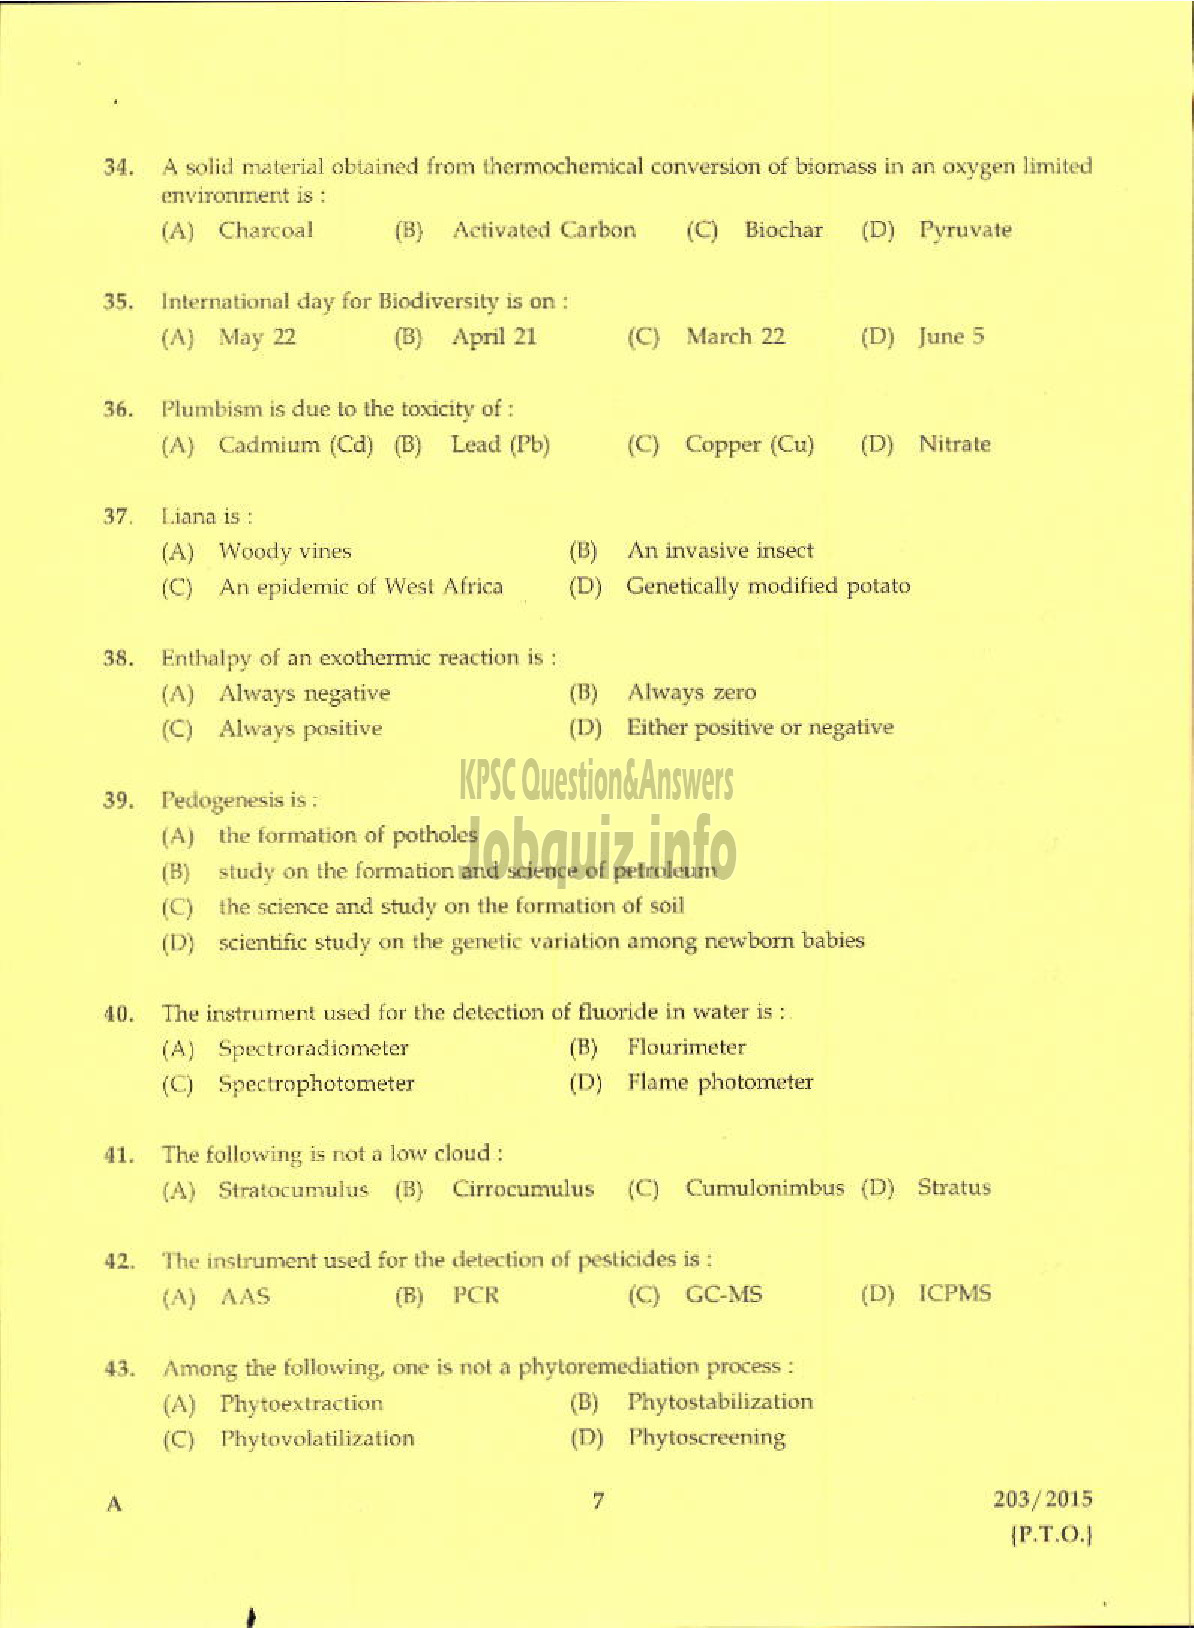 Kerala PSC Question Paper - ASSISTANT ENVIRONMENTAL OFFICER ENVIRONMENT AND CLIMATE CHANGE-5